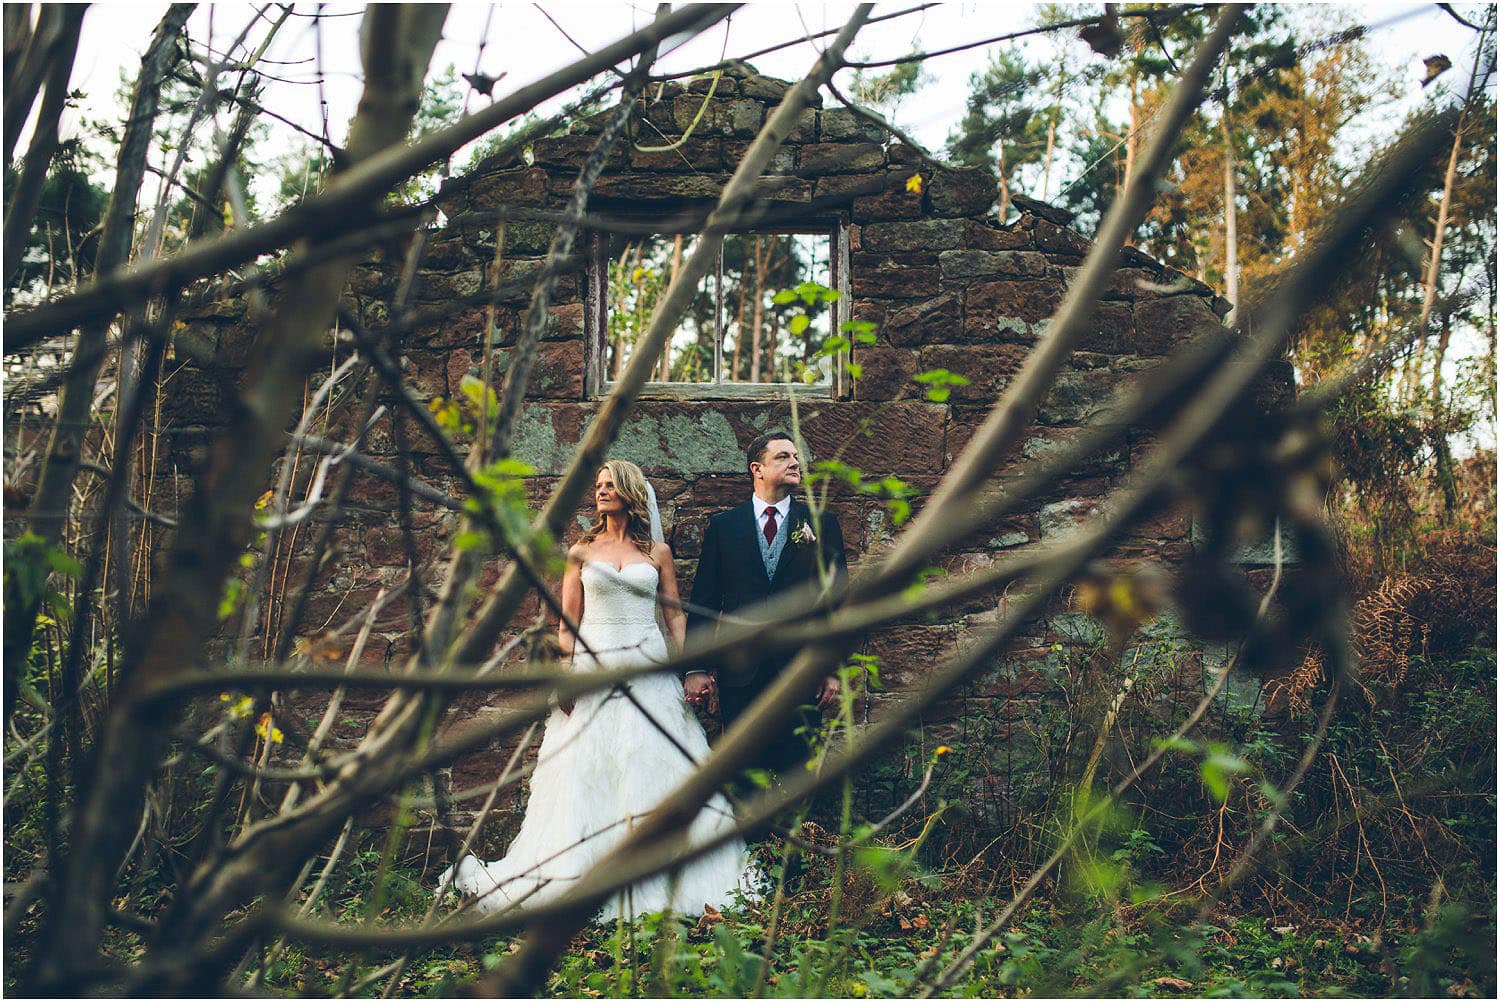 A bride and groom take their wedding portraits in front of an abandoned, rustic outbuilding on the estate of Peckforton Castle.